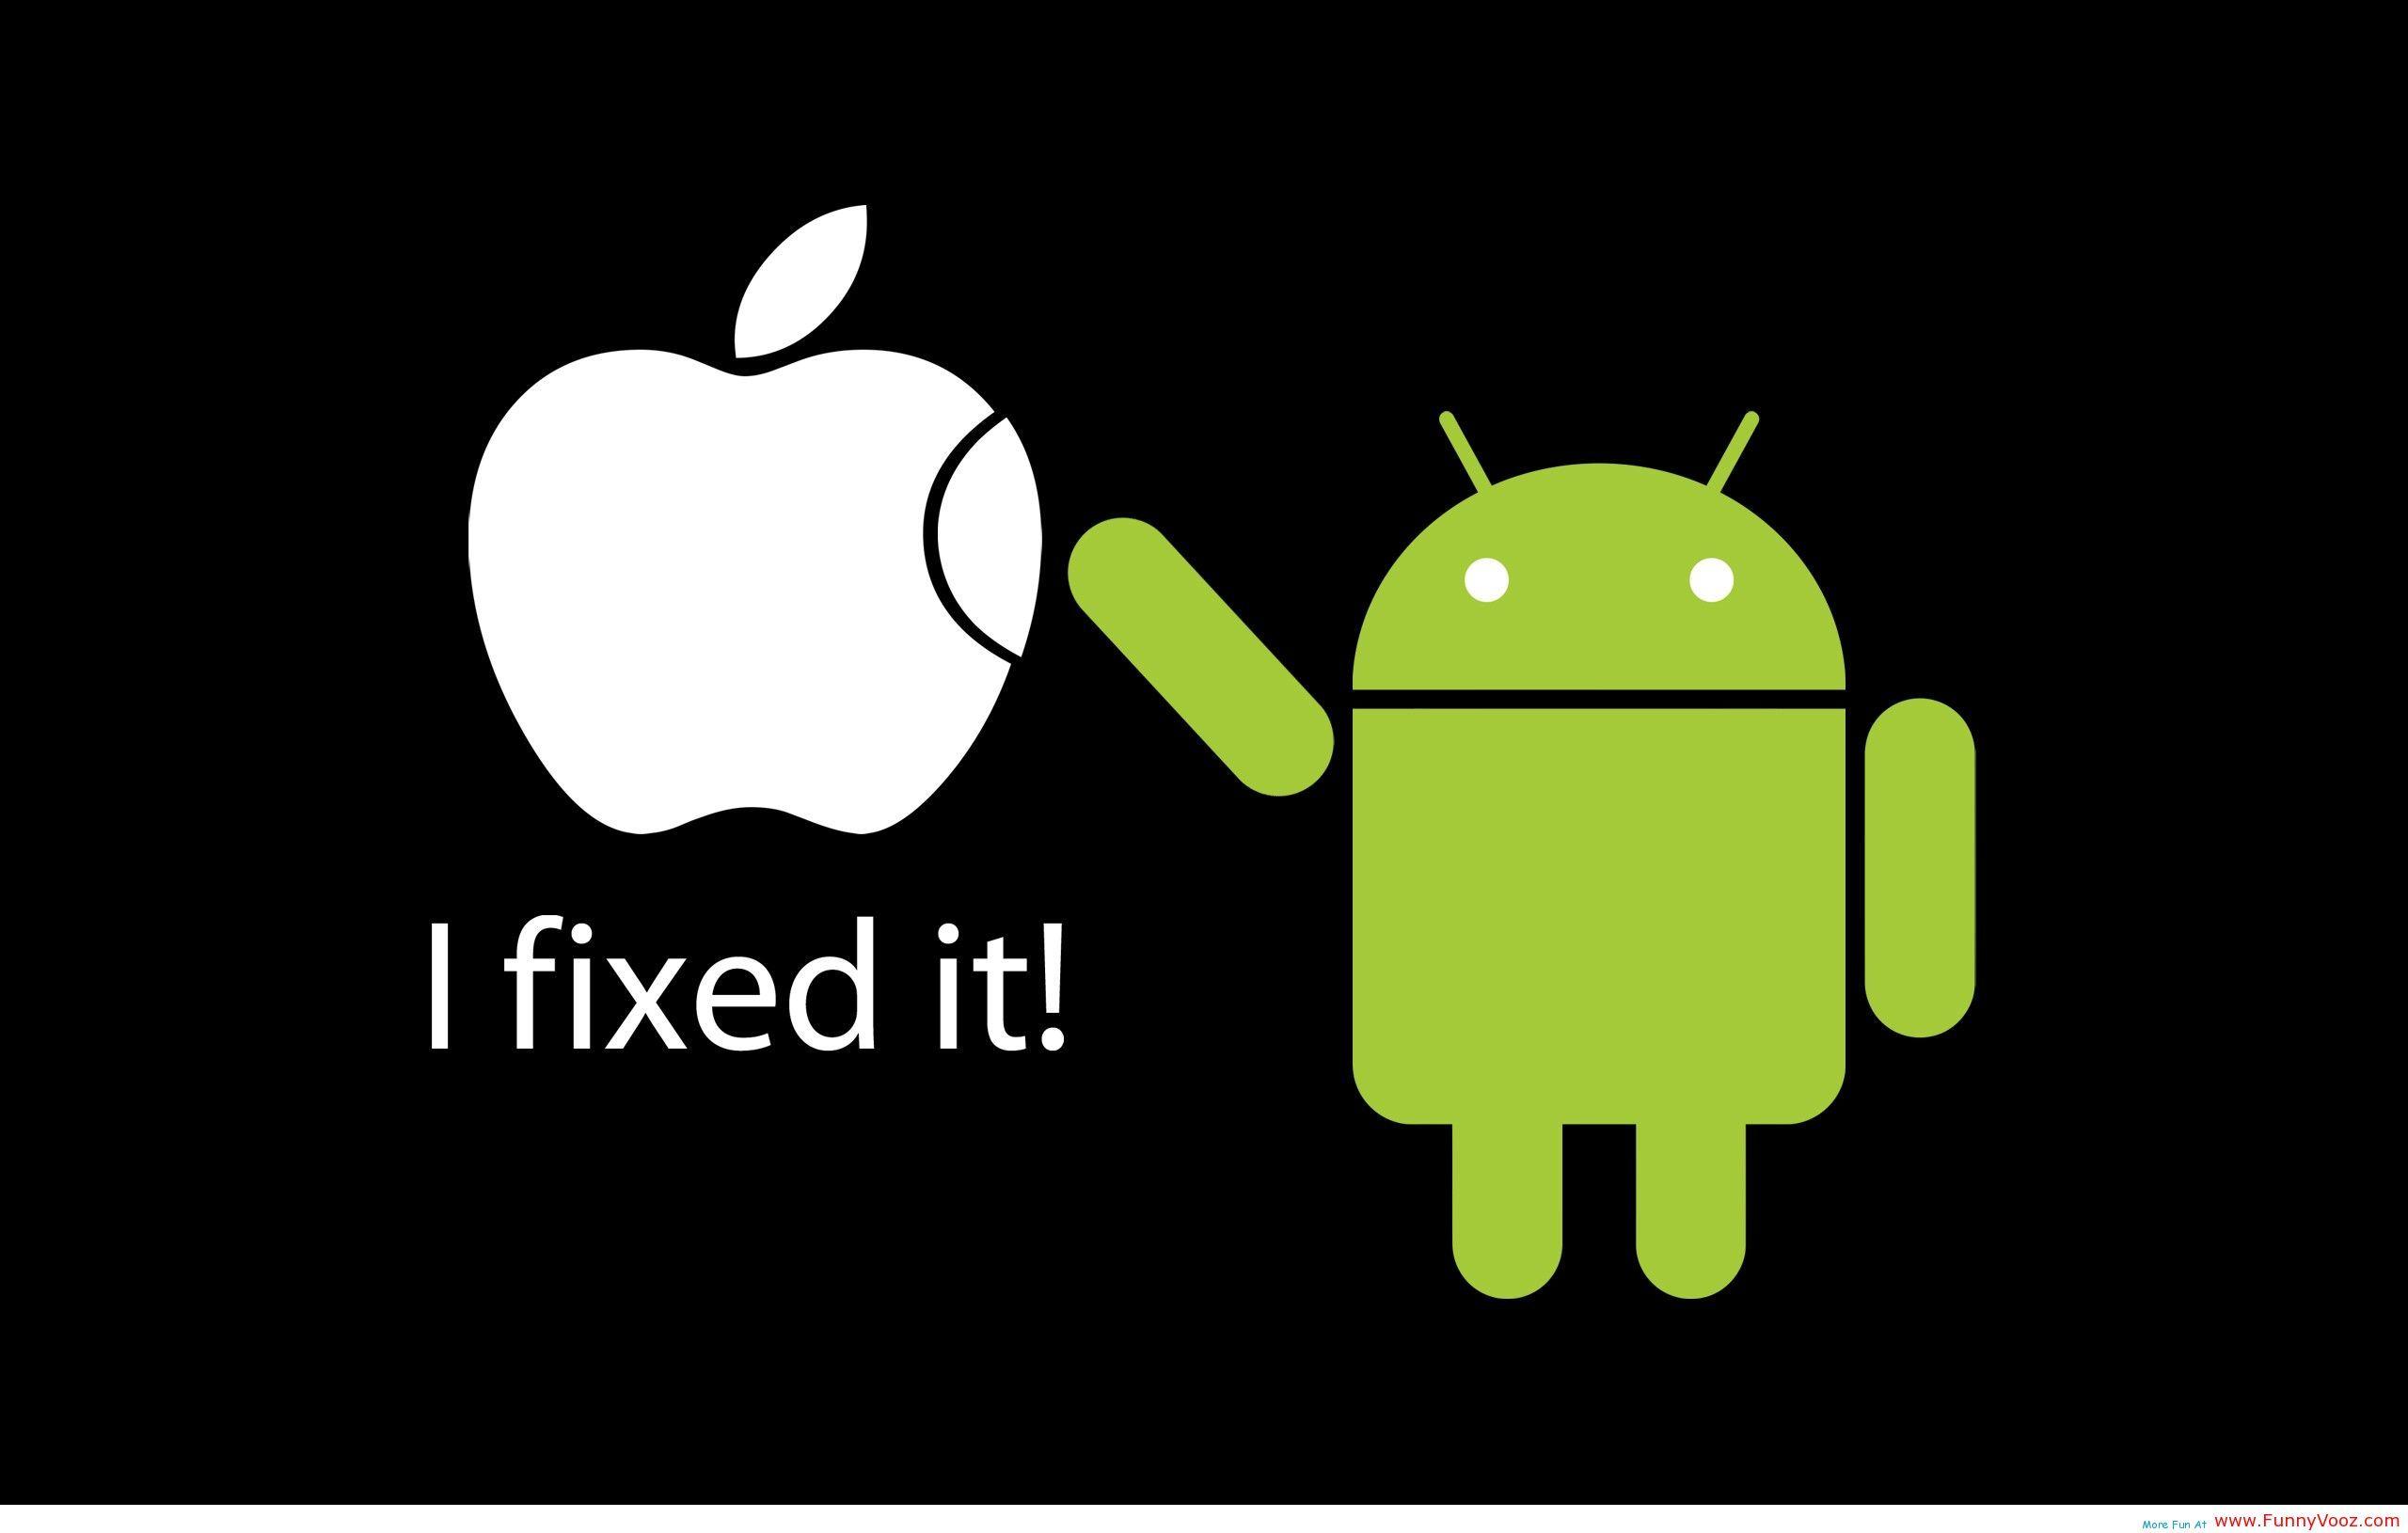 Funny Apple Logo - Android Fix Apple Logo Funny Wallpapers HD | Humor | Funny, Funny ...